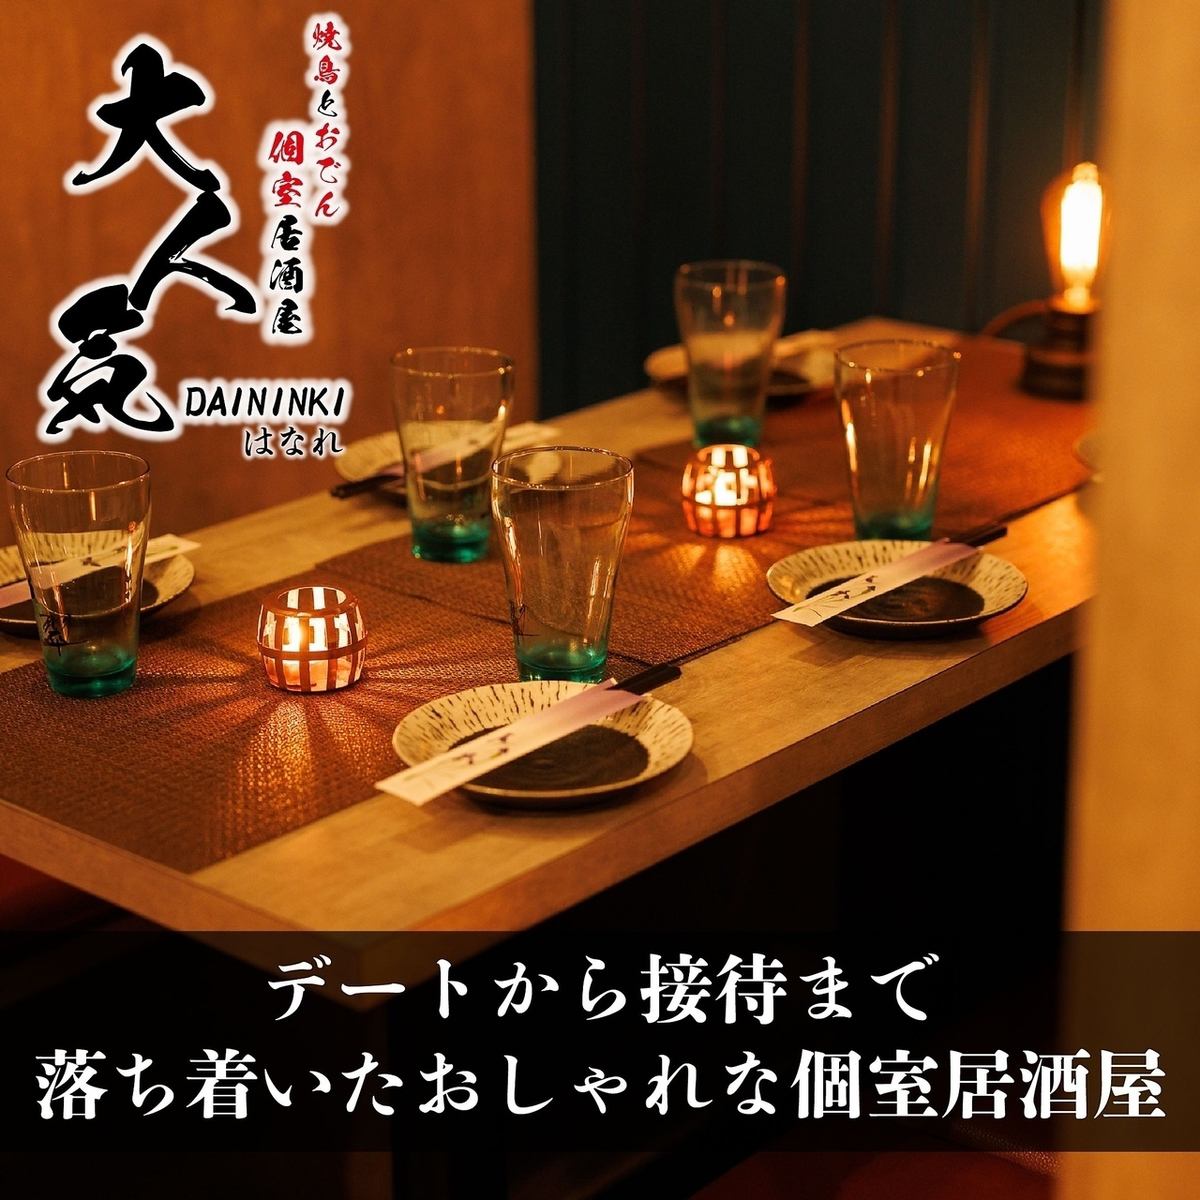 [Private room date] Stylish space for just the two of you ♪ All-you-can-eat and drink course also available ◎